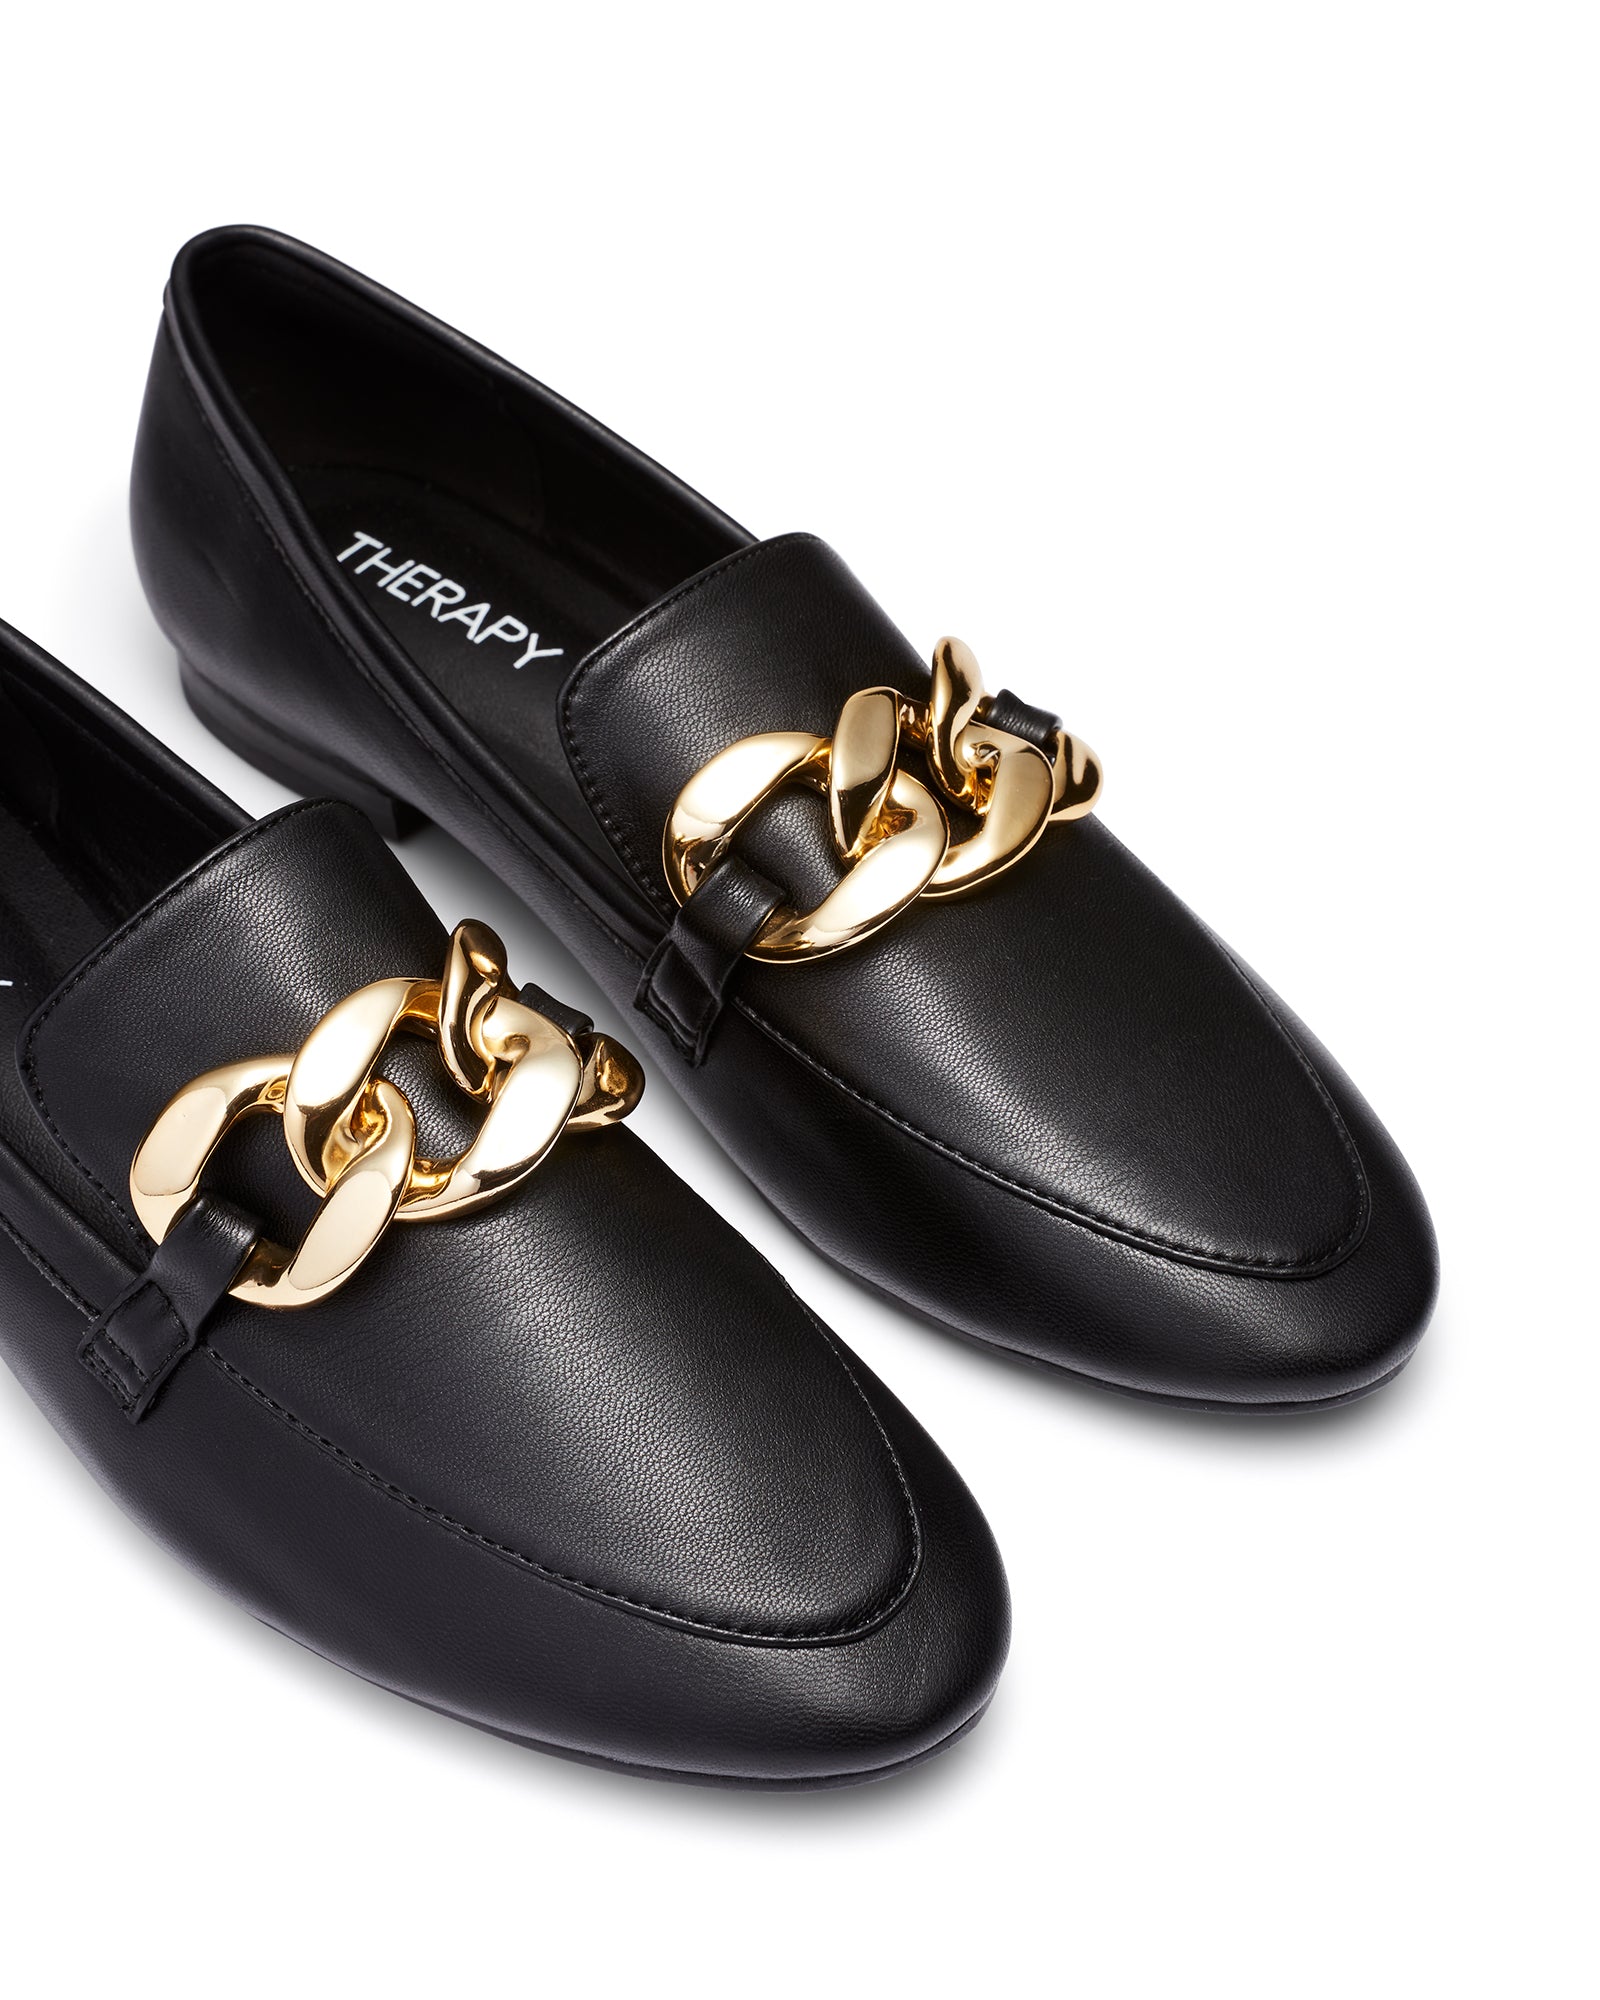 Therapy Shoes Swerve Black | Women's Loafer | Flat | Slip On | Chain